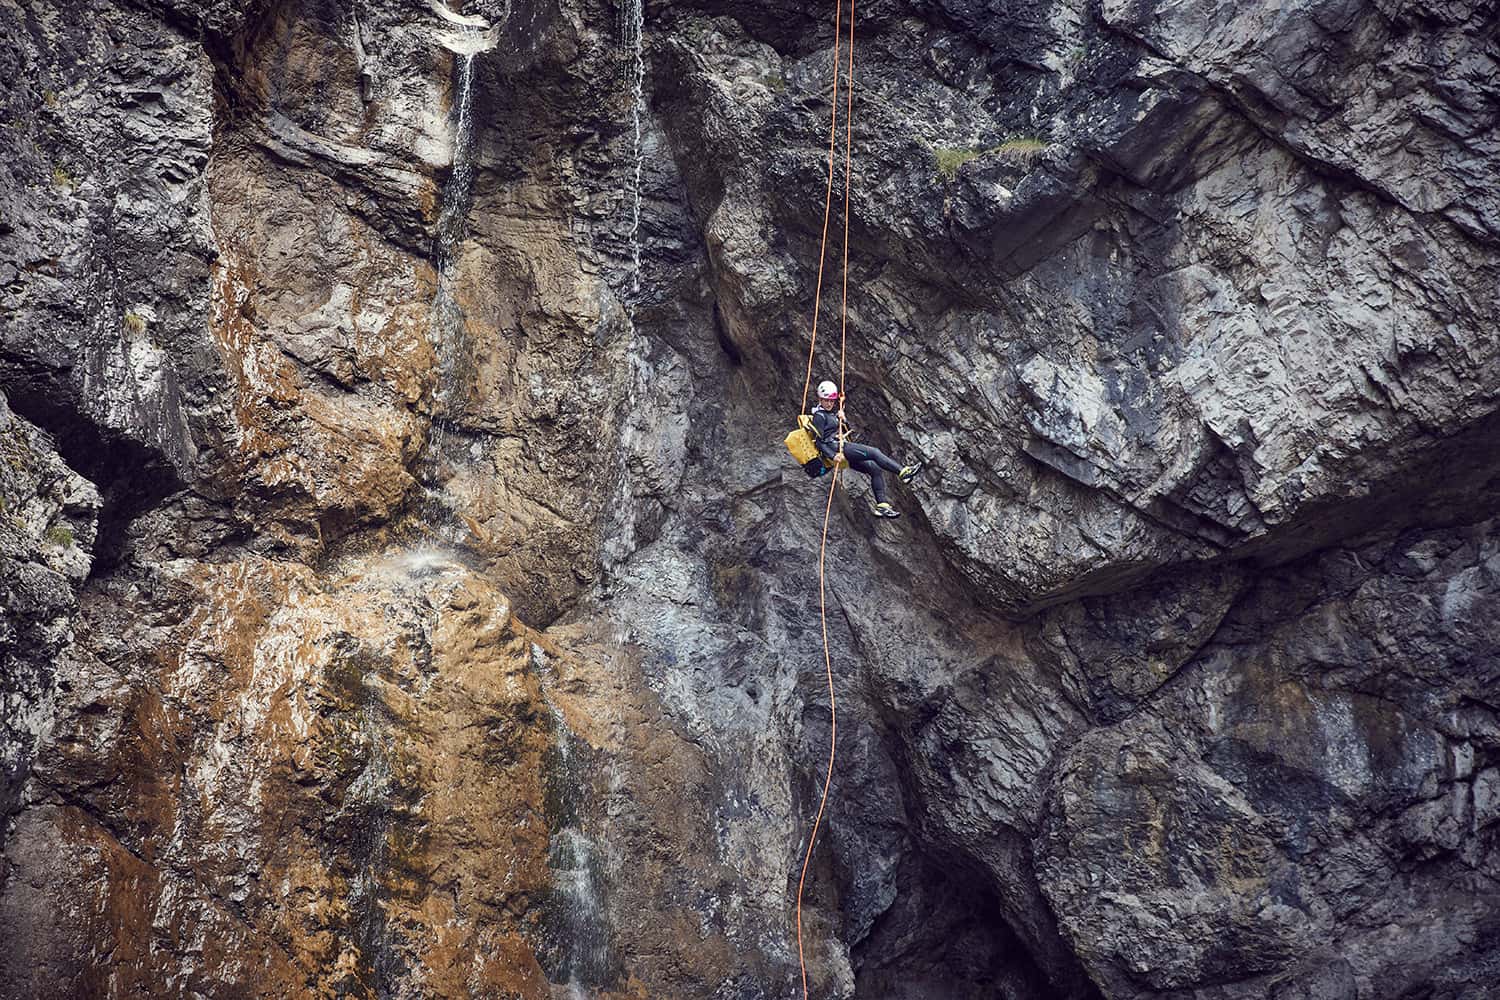 Stunt Woman Kim abseiling down a very high cliff on a canyoning tour in Austria